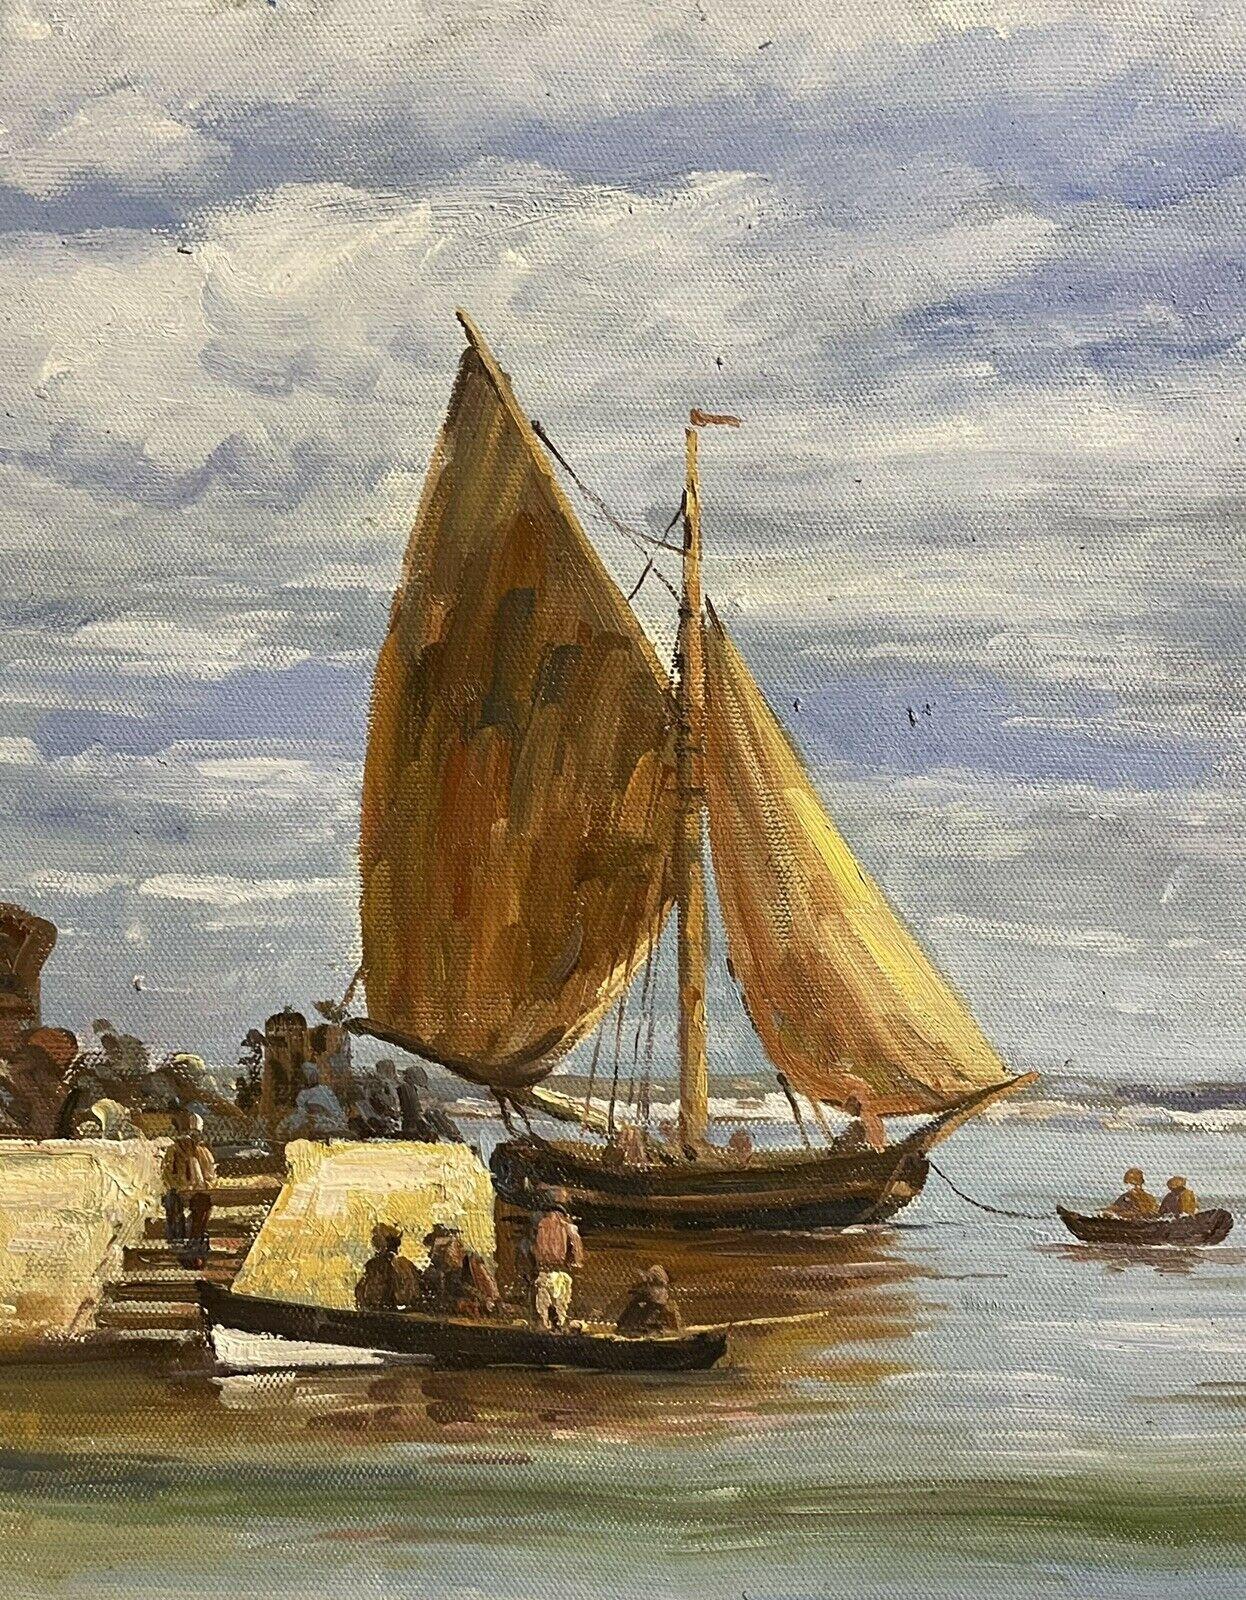 Artist/ School: C. Dommel, French 20th century, signed

Title: Honfleur Harbour

Medium: oil painting on canvas, framed.

Size:  painting: 12 x 16 inches,  frame: 17.5 x 21.75 inches 

Provenance: private collection, Auvers-sur-Oise,